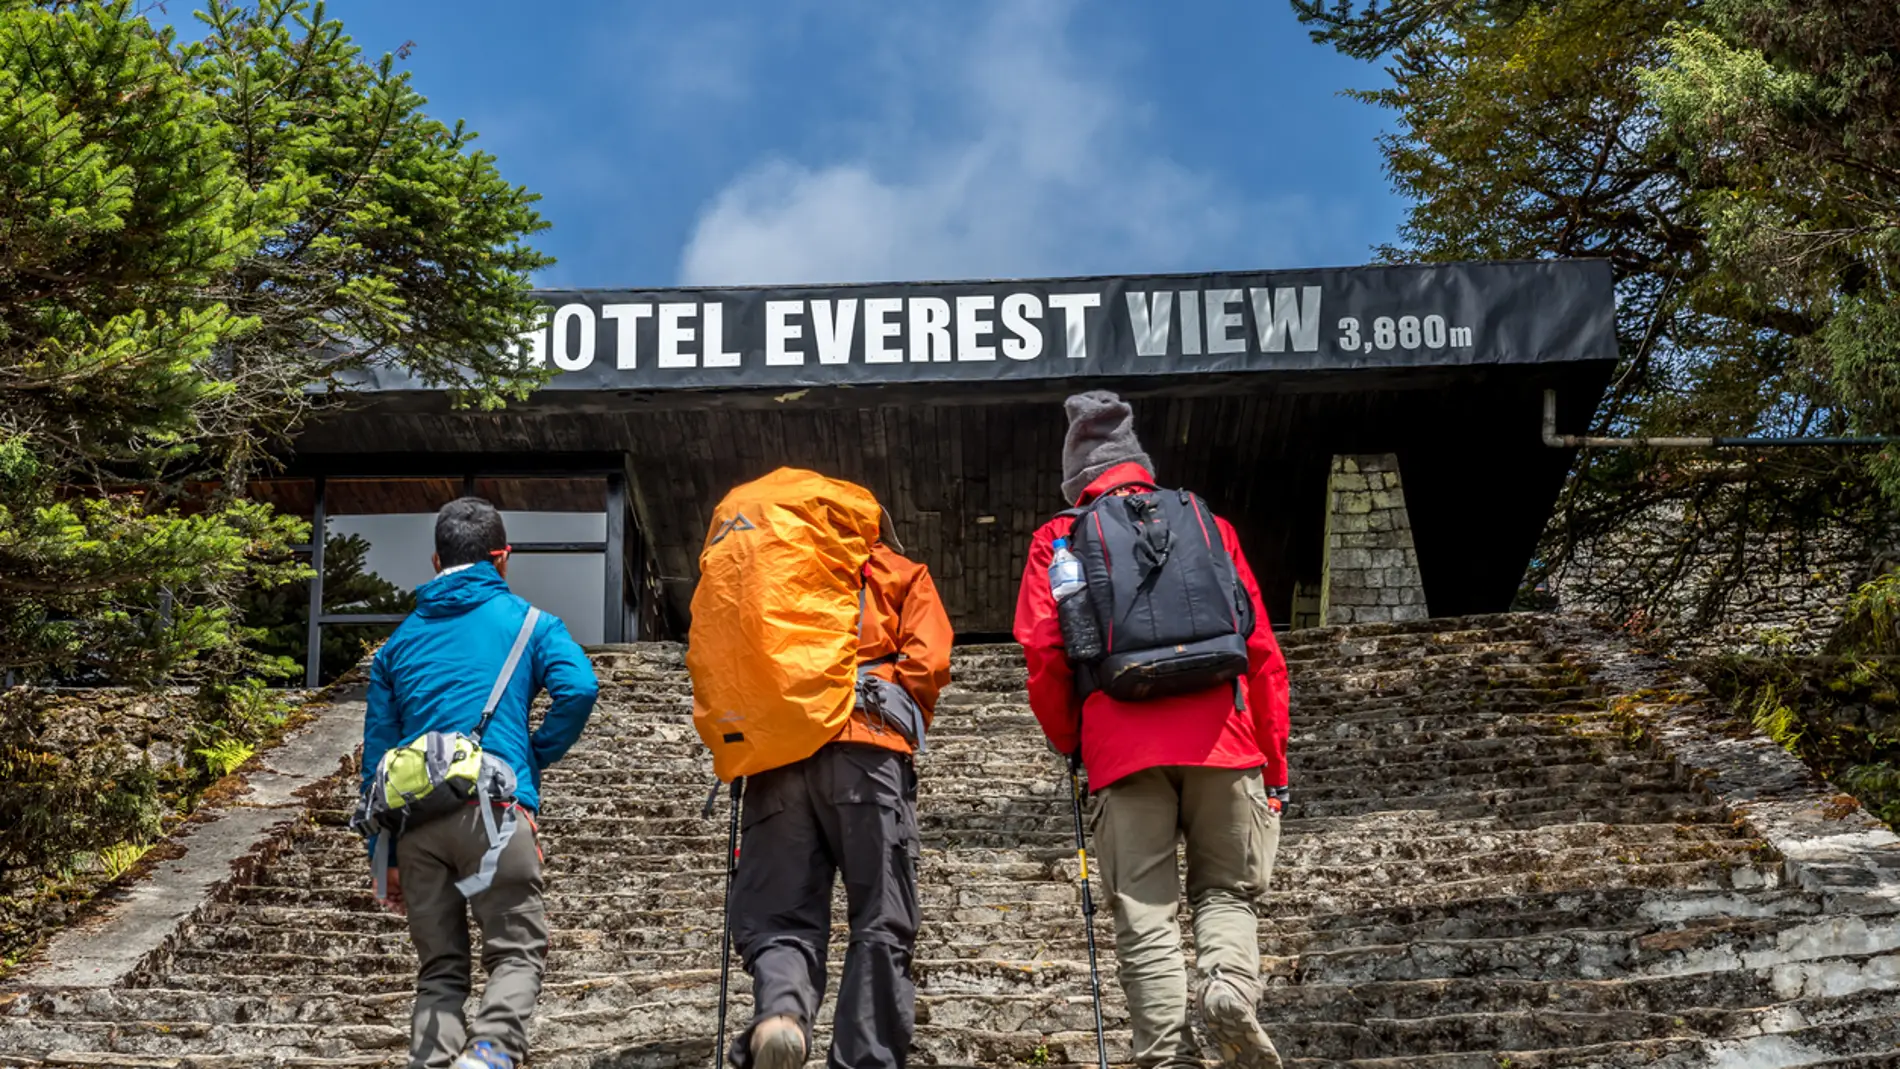 Hotel 'Everest View'